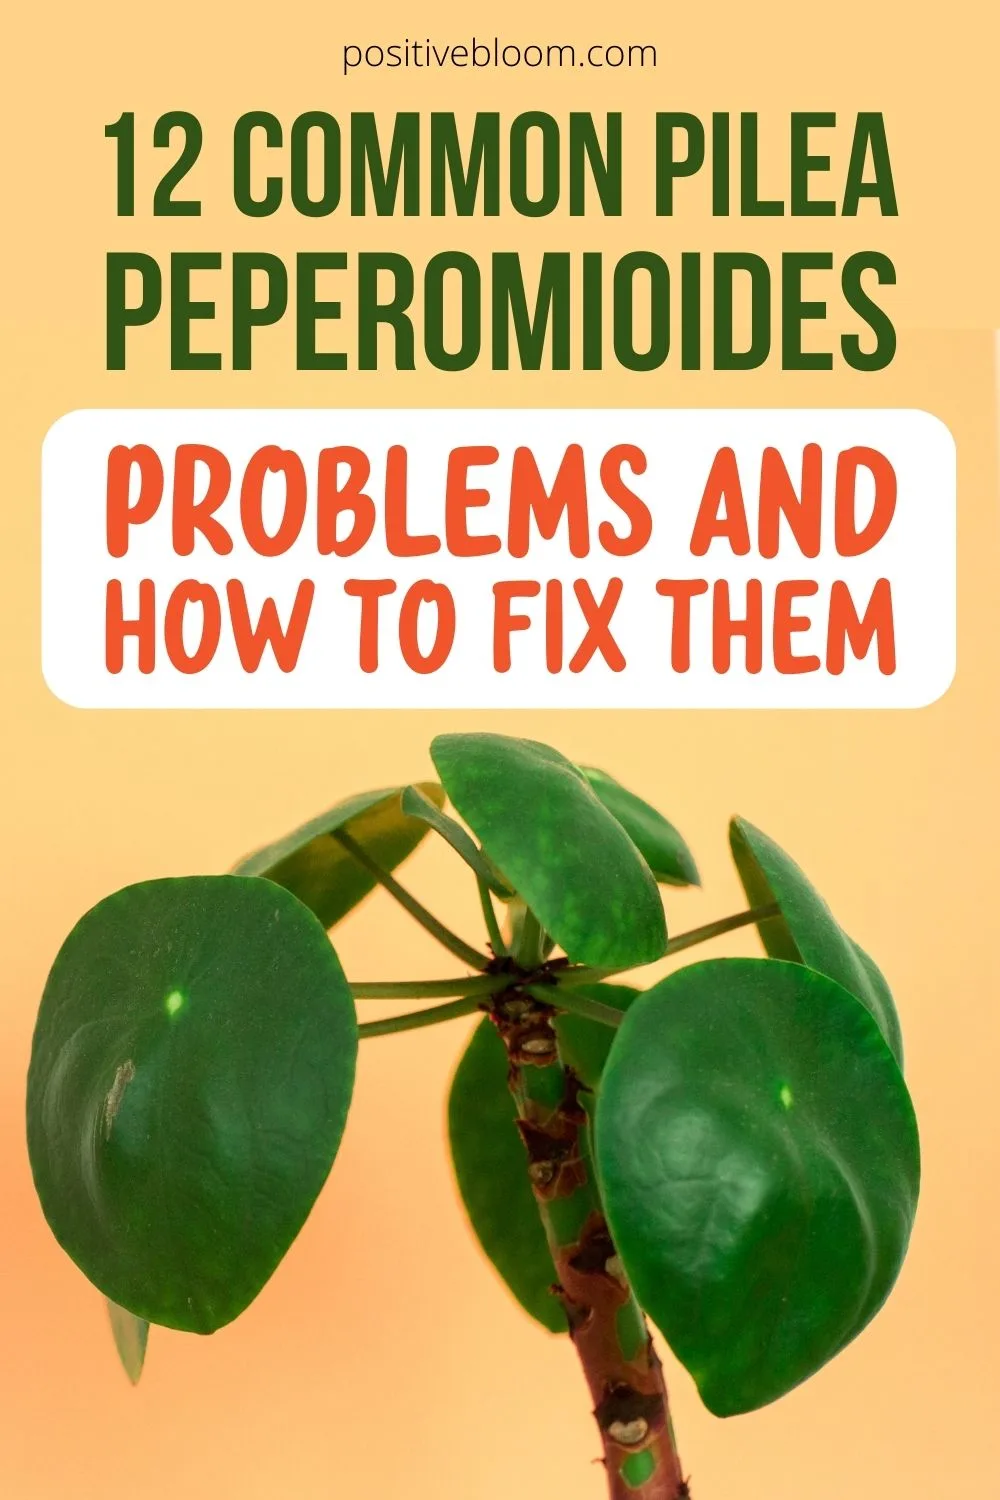 12 Common Pilea Peperomioides Problems And How To Fix Them Pinterest